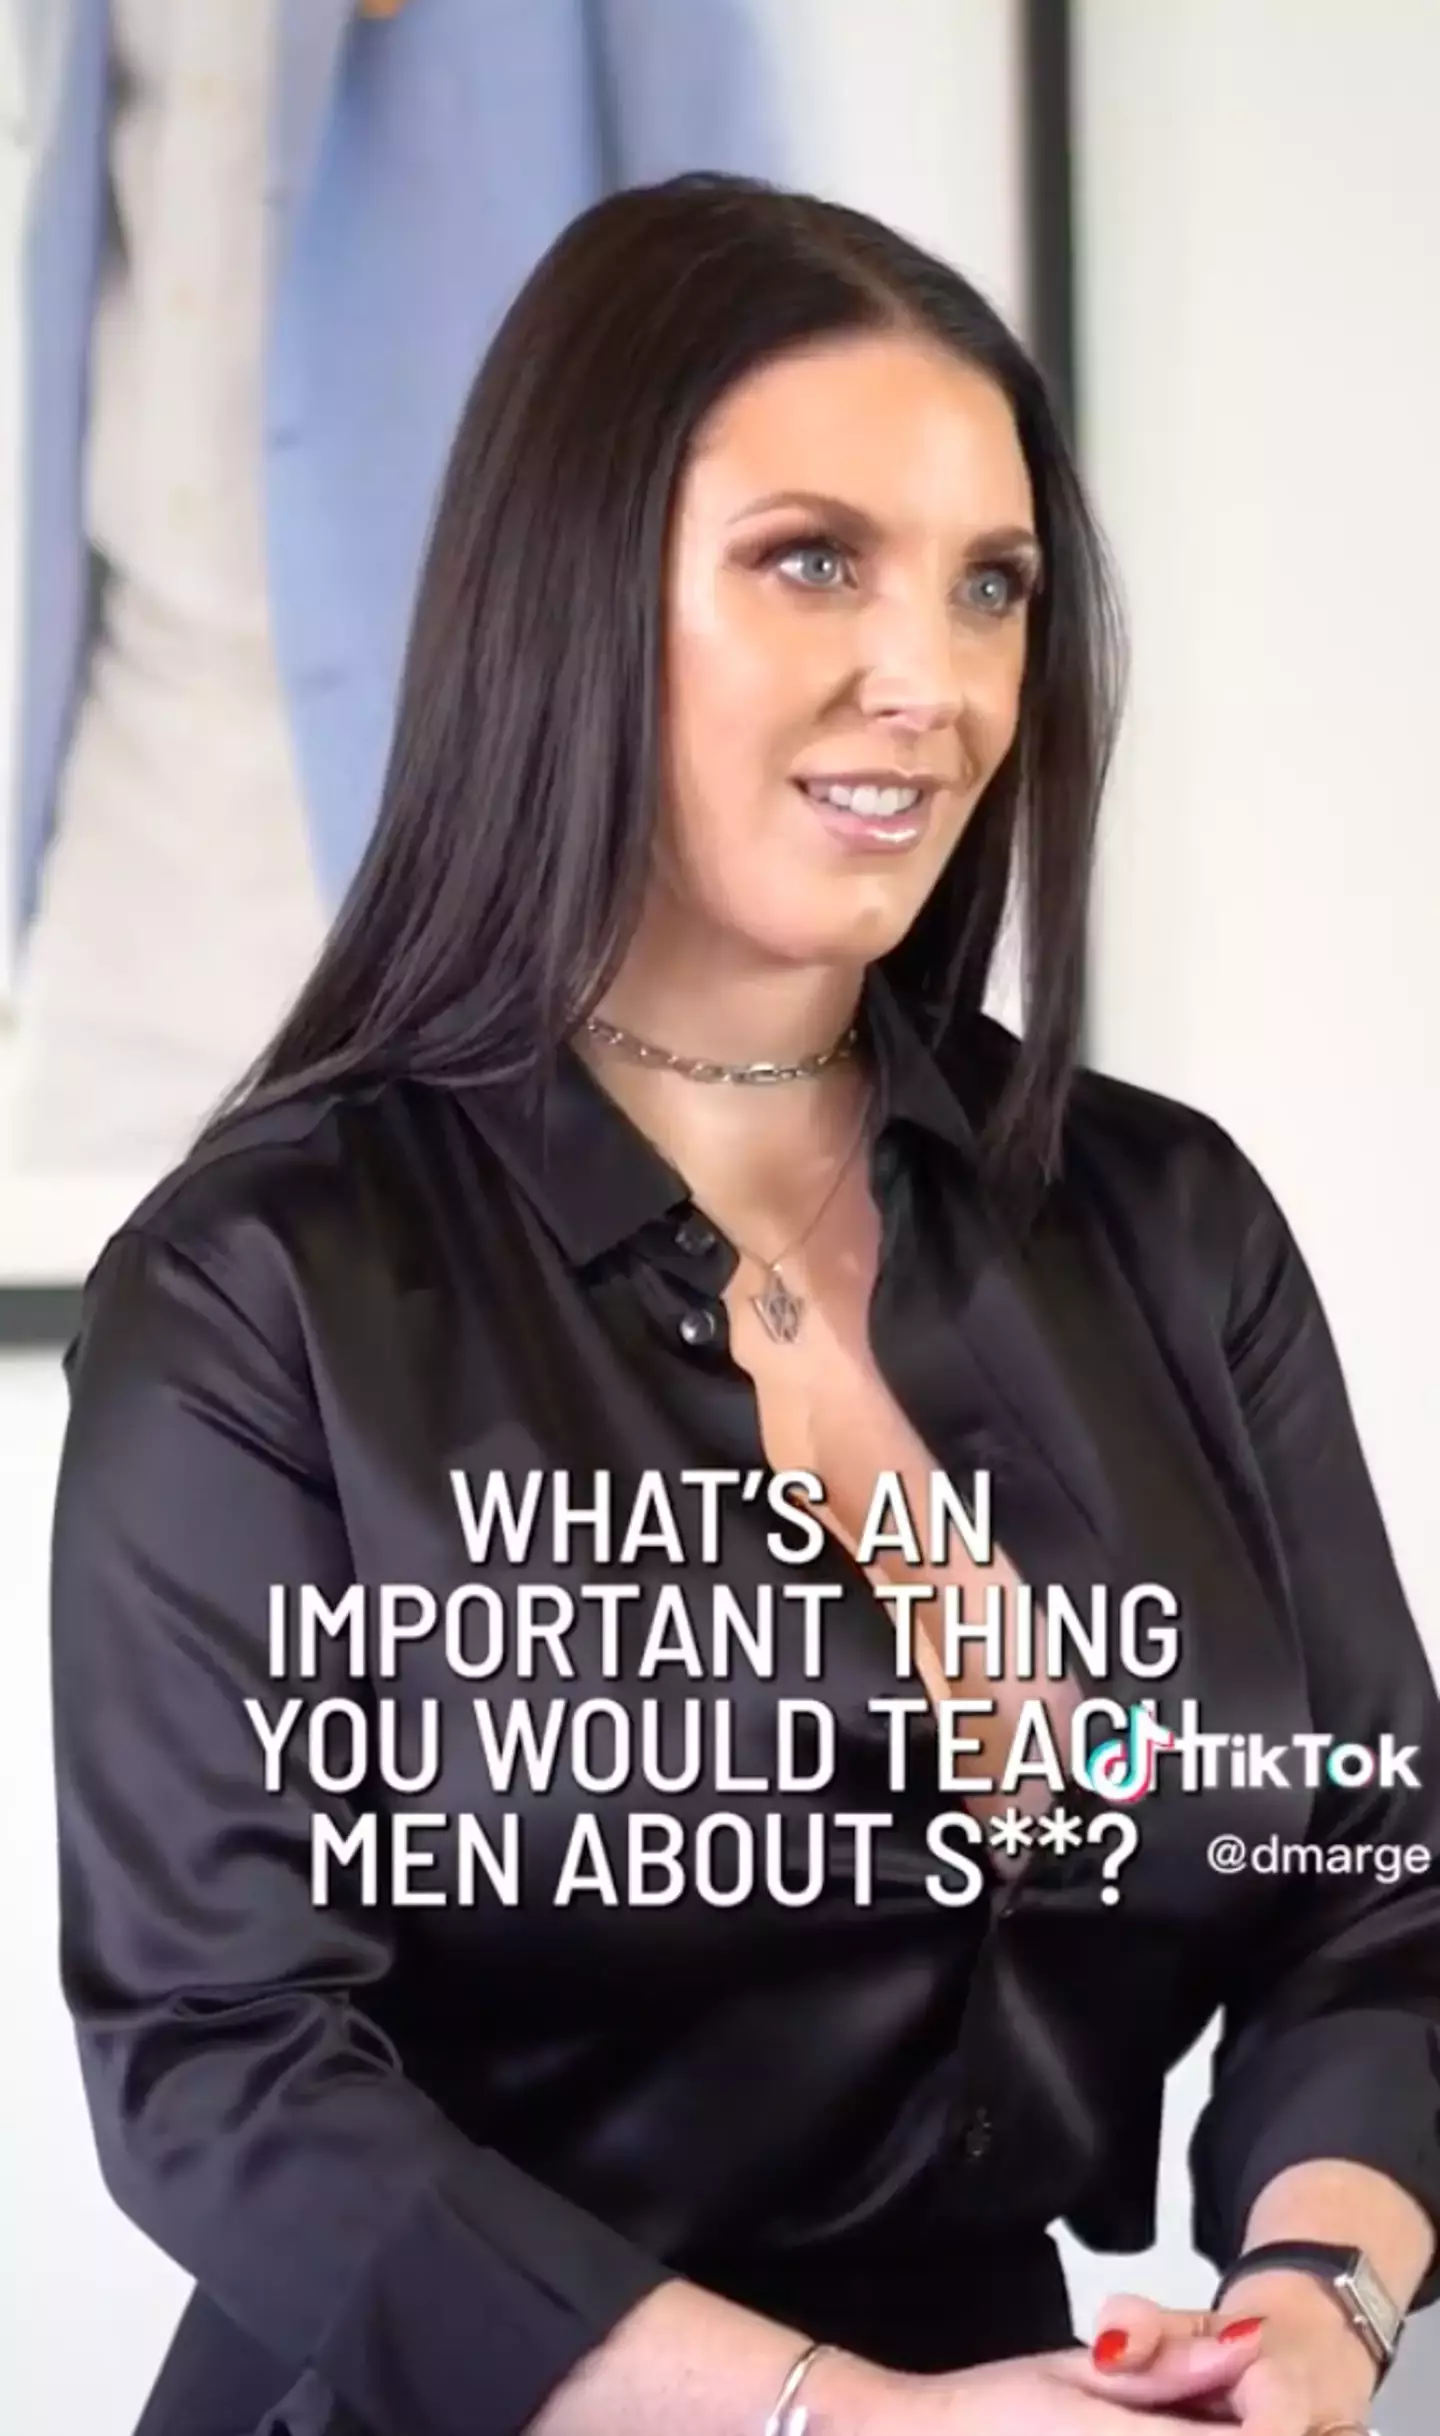 Angela White shared some advice for men in the bedroom.